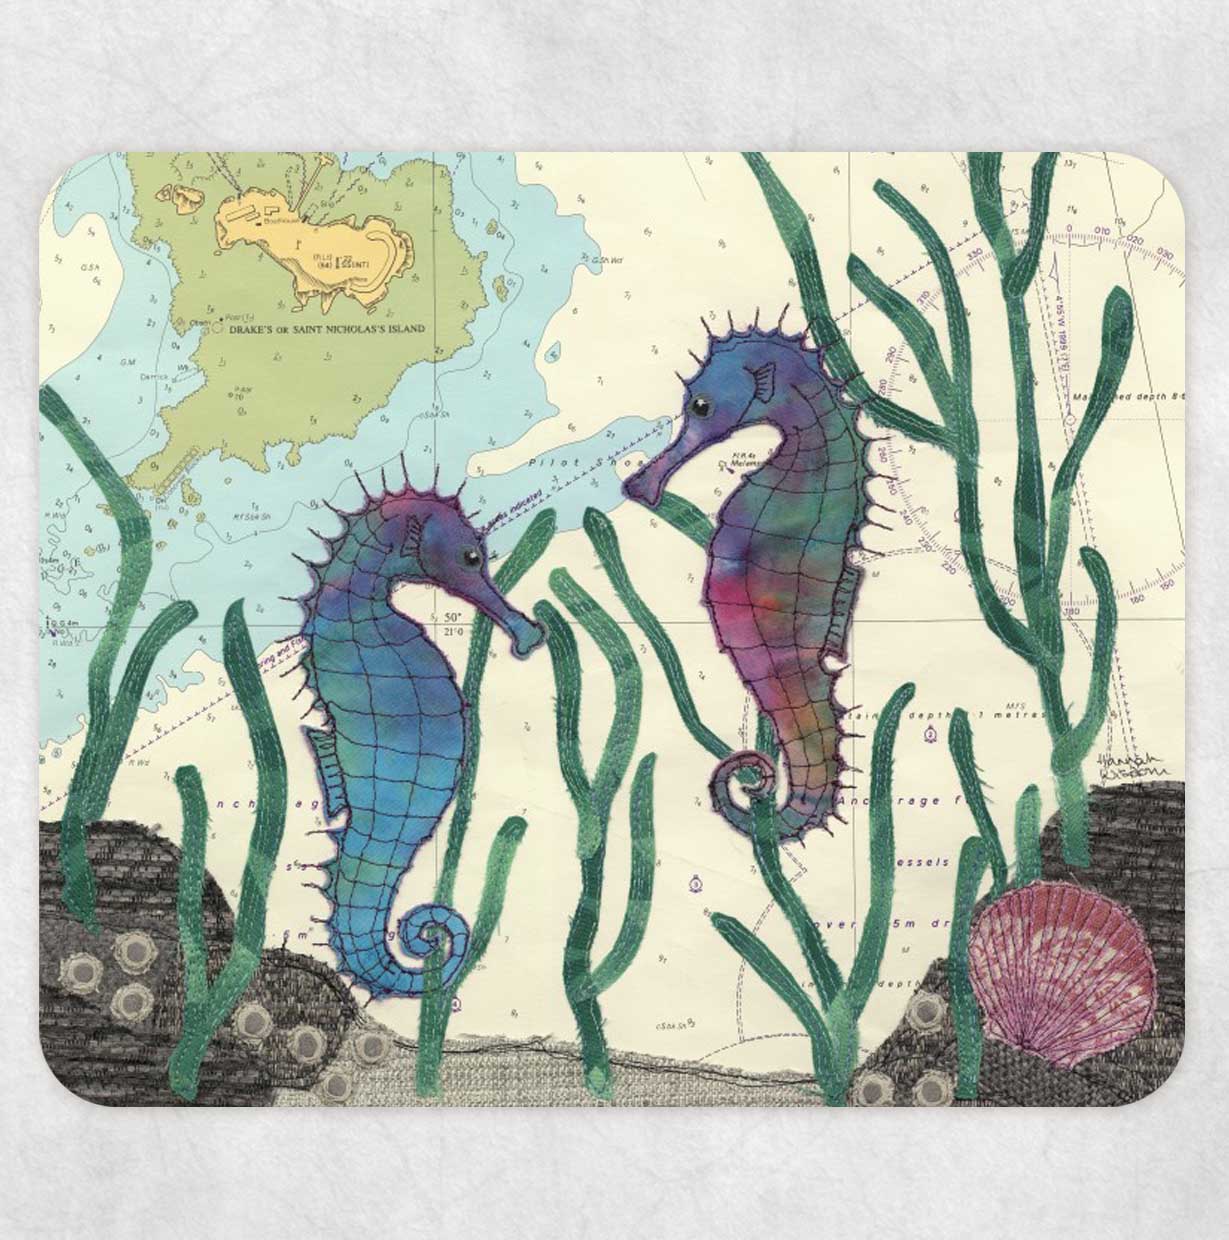 Placemat printed with a textile art design of seahorses on an old sea chart